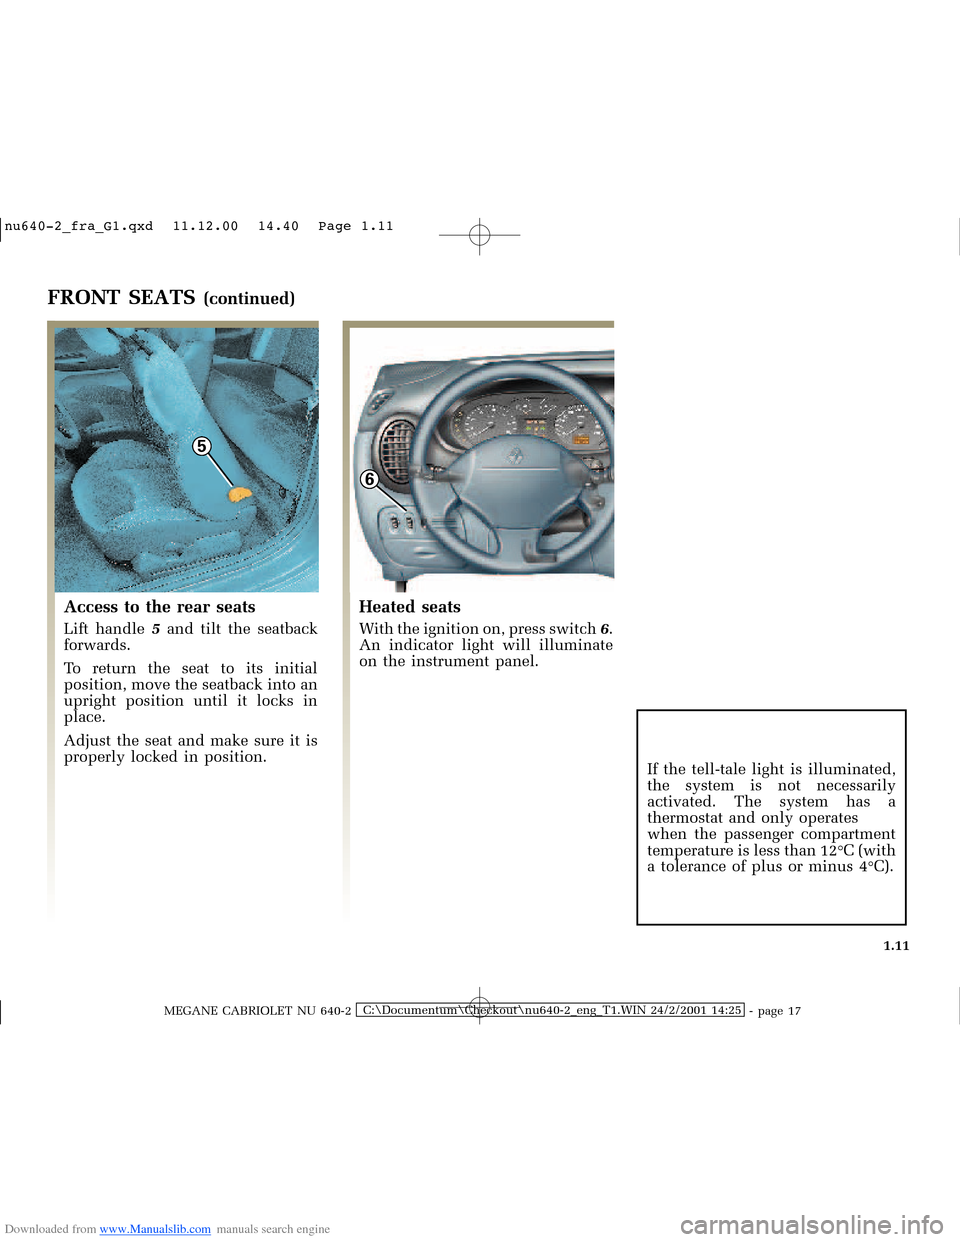 RENAULT MEGANE 2000 X64 / 1.G User Guide Downloaded from www.Manualslib.com manuals search engine 5
6
�Q�X������B�I�U�D�B�*���T�[�G� � ��������� � ������ � �3�D�J�H� ����
MEGANE CABRIOLET NU 640-2C:\Documentum\